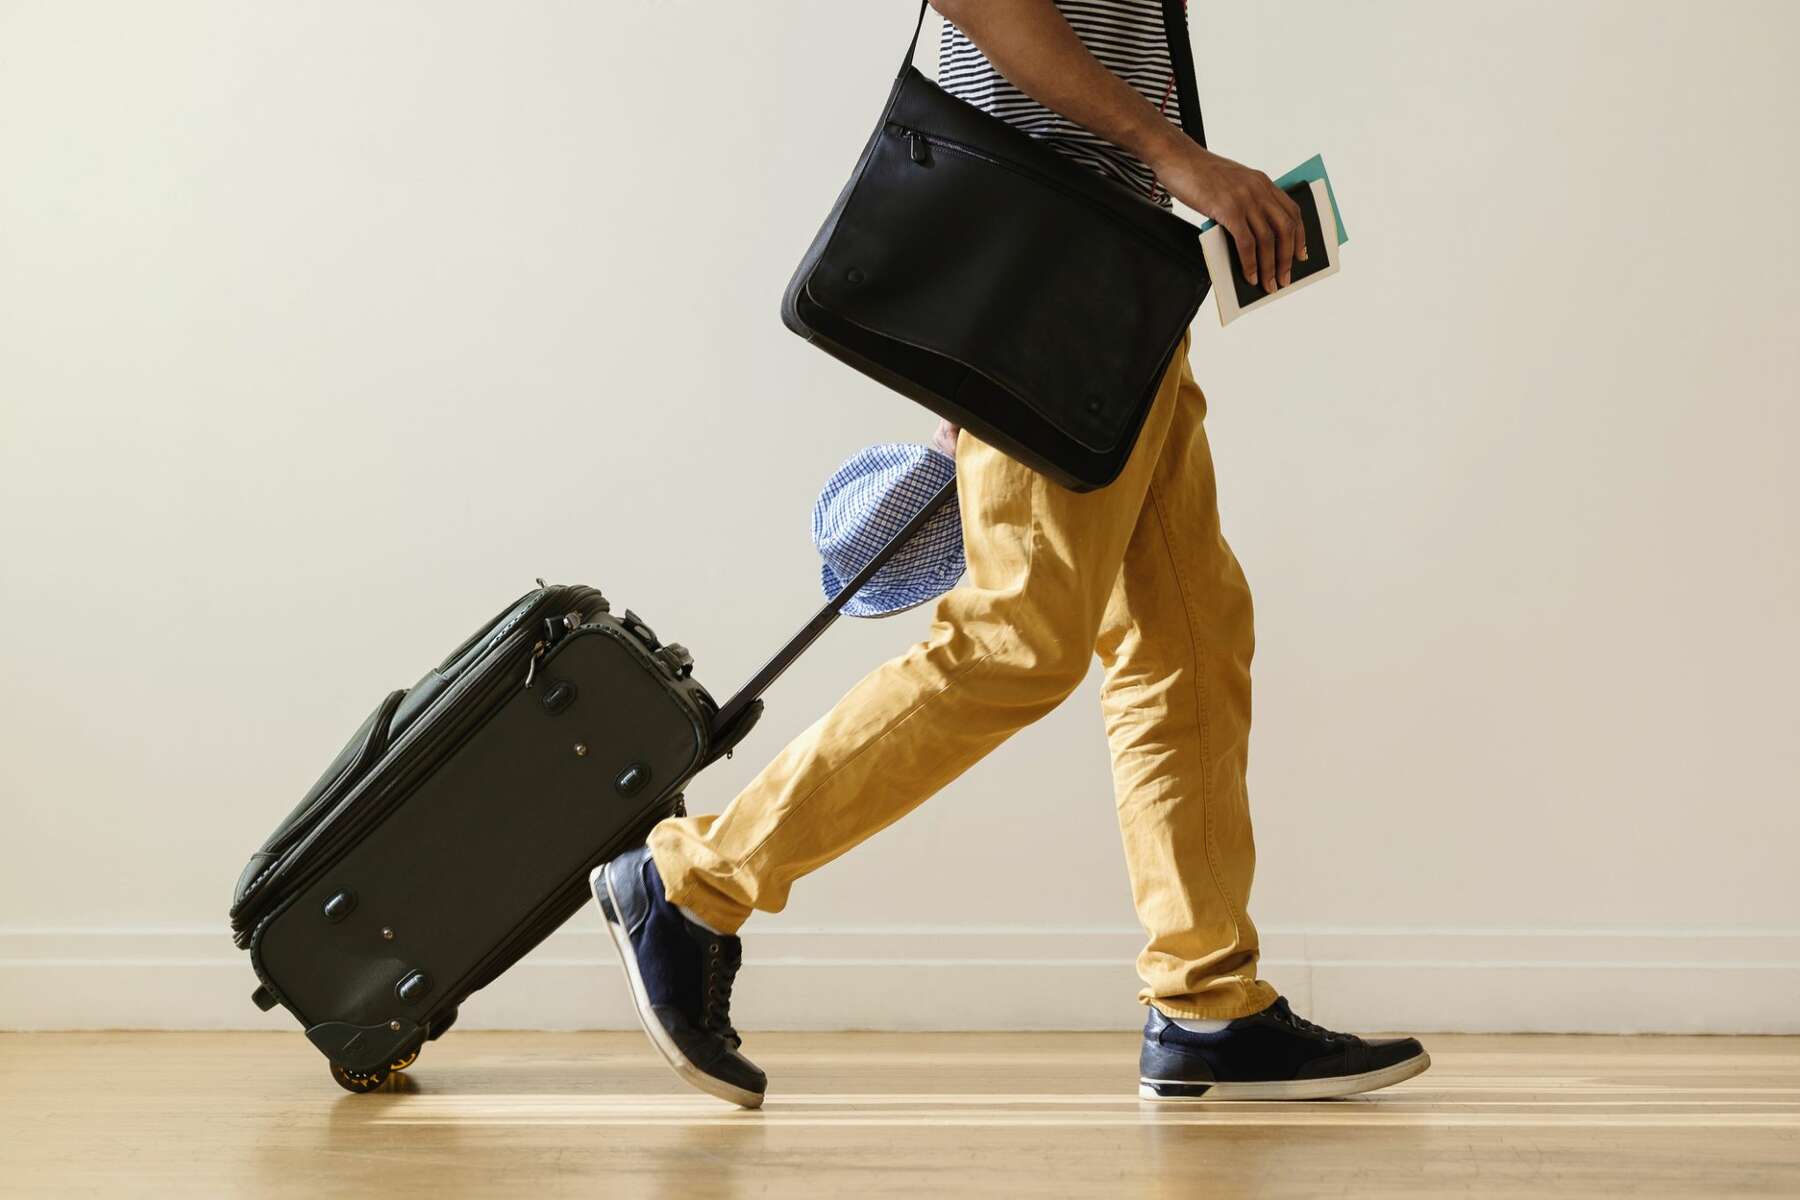 Carry-on Size - The Southwest Airlines Community